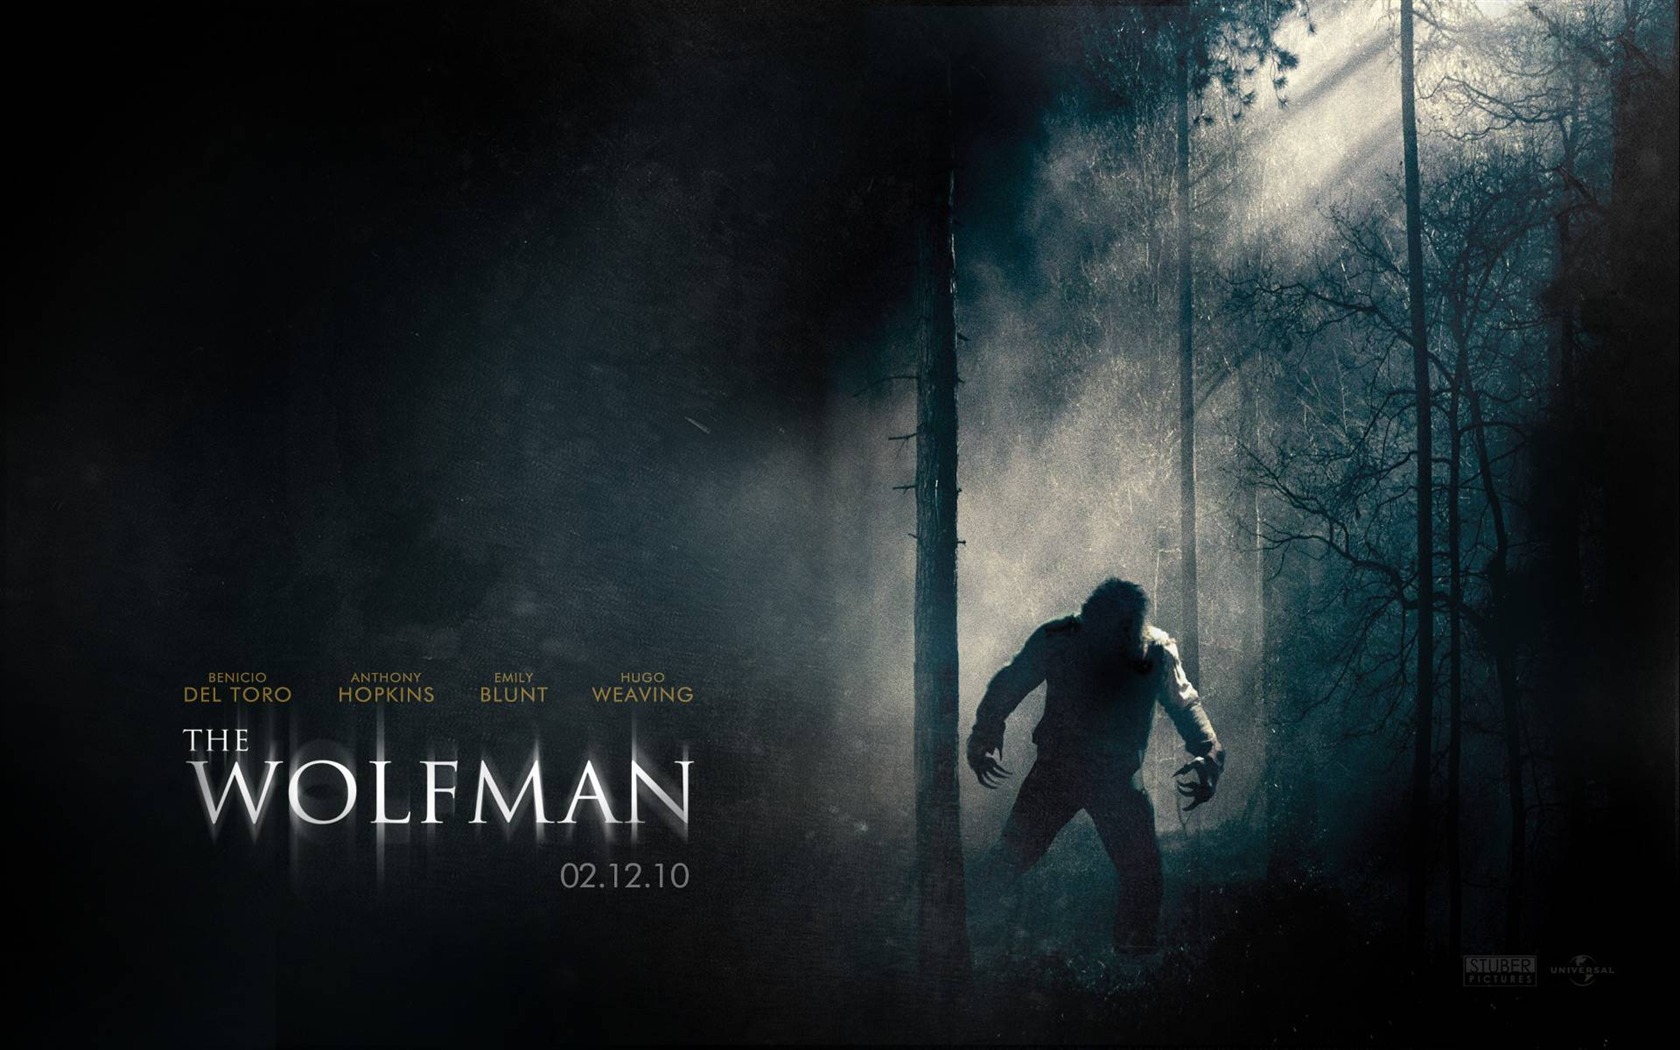 The Wolfman Movie Wallpapers #2 - 1680x1050